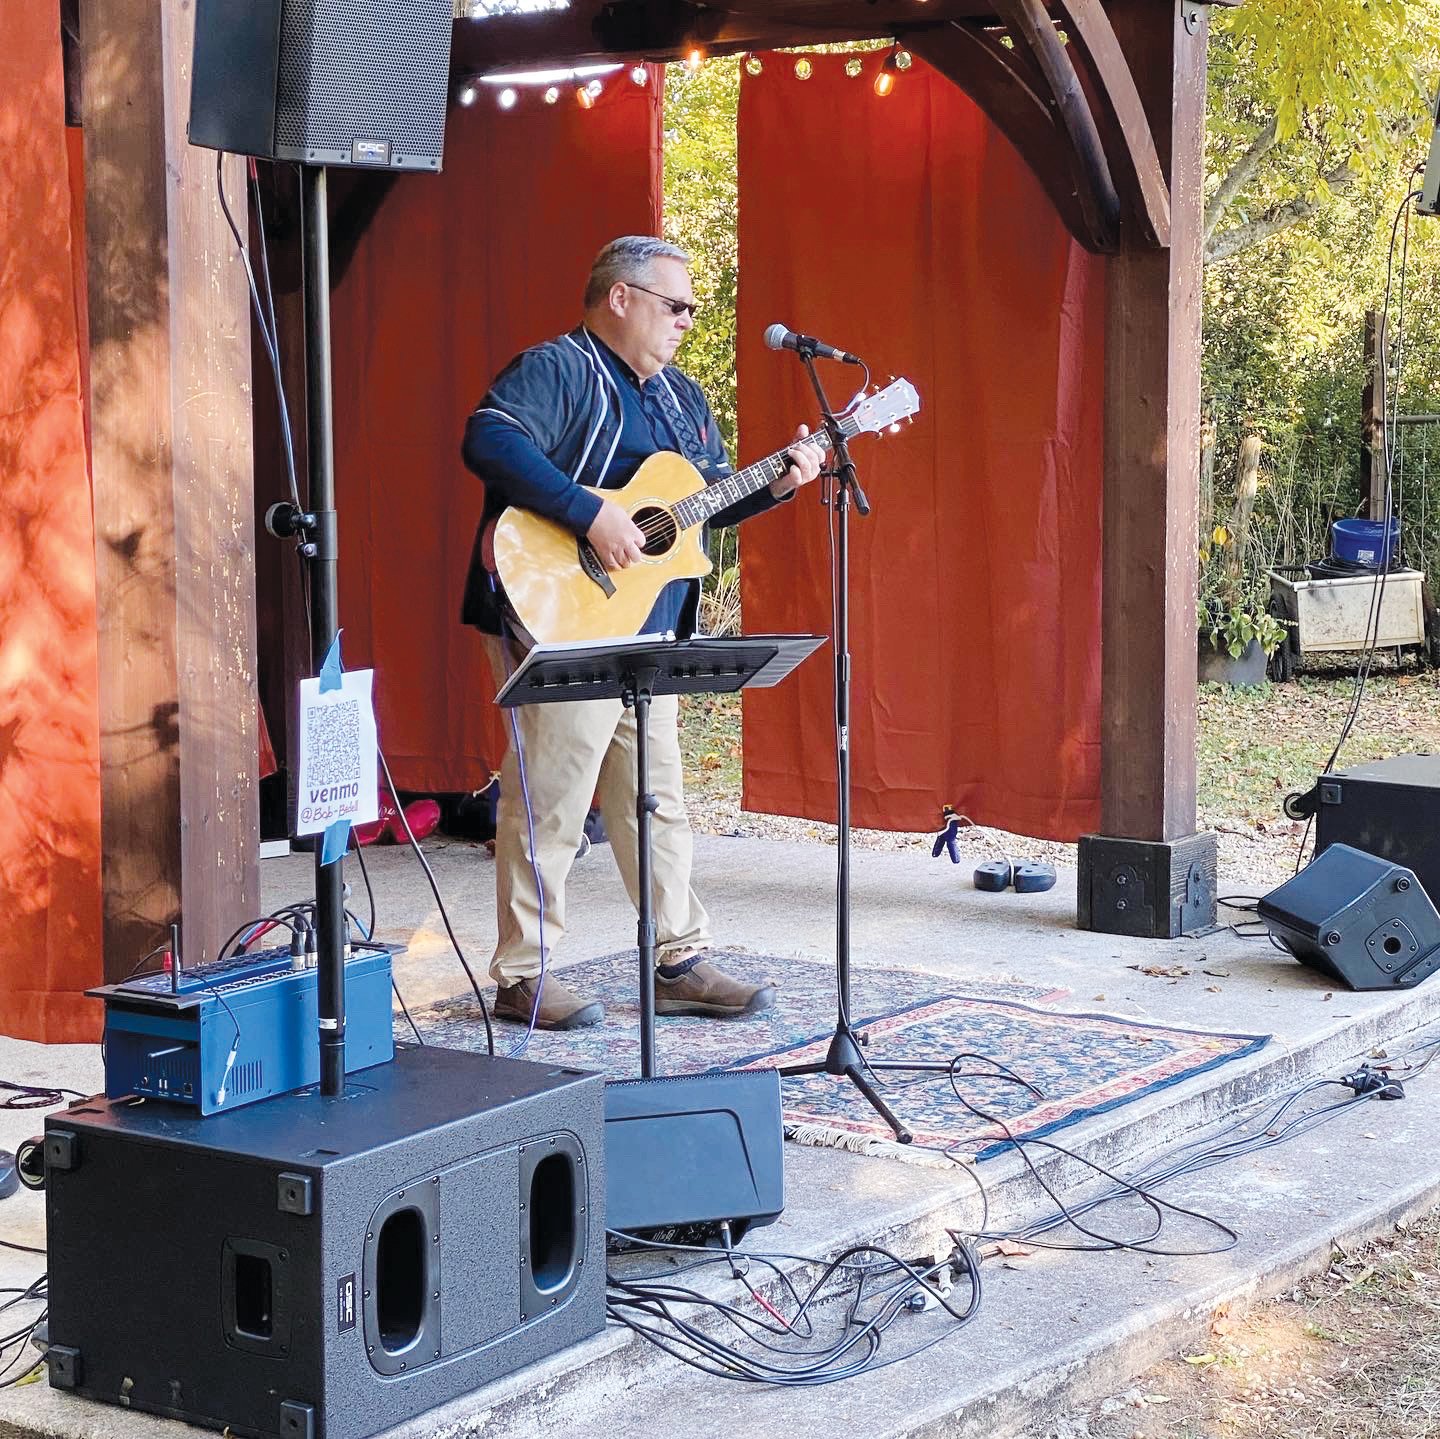 Bob Bedell of Catbird Seat plays at ODDCO on Nov. 13 as part of a fundraising concert for the Small Museum of Folk Art.